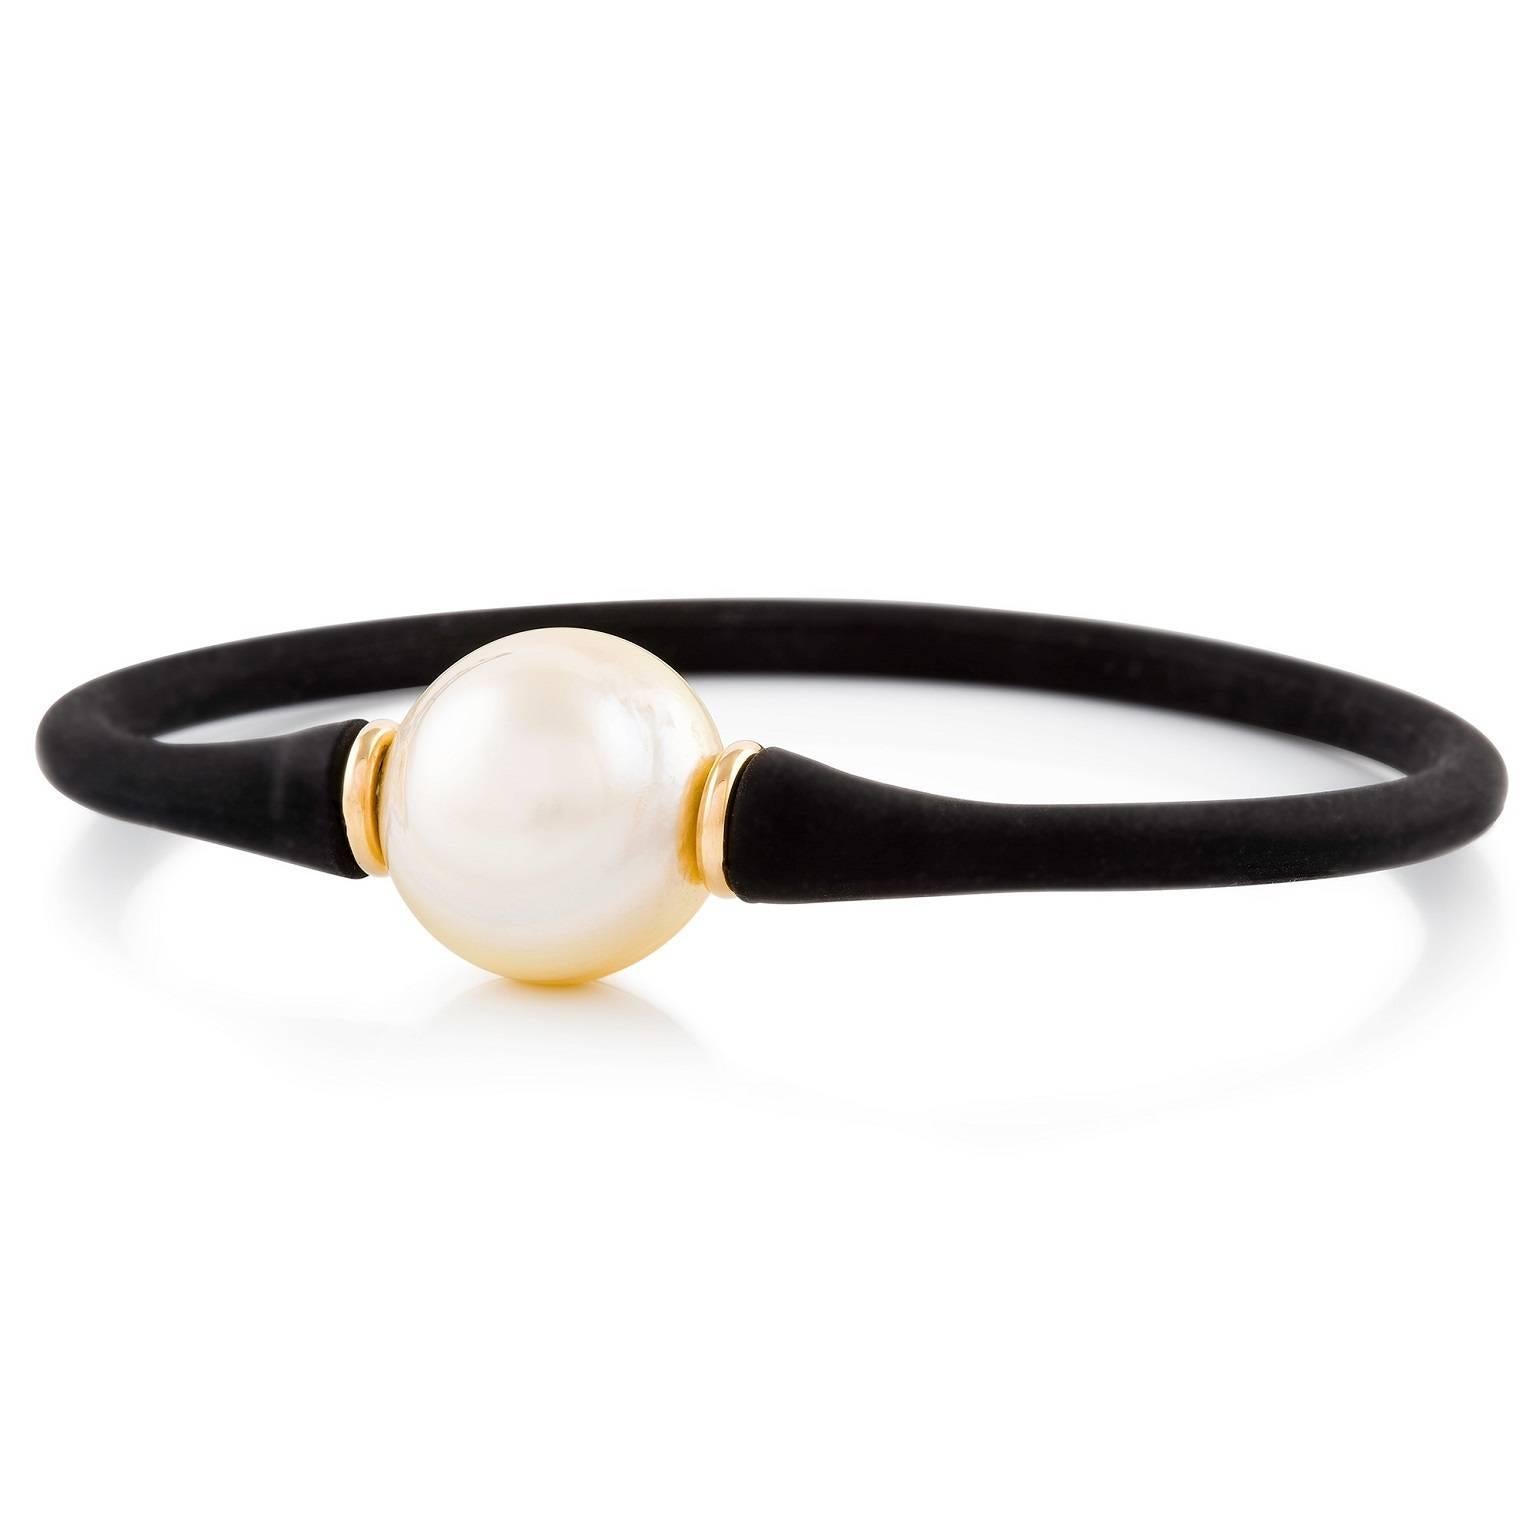 Grande Perla Bracelet

A petite champagne diamond has been bezel set in 18ct white gold inlaid in 18ct yellow gold and custom set in a stunning South Sea Pearl.

Round brilliant cut diamond: champagne colour, 0.10ct

South Sea pearl: high lustre,